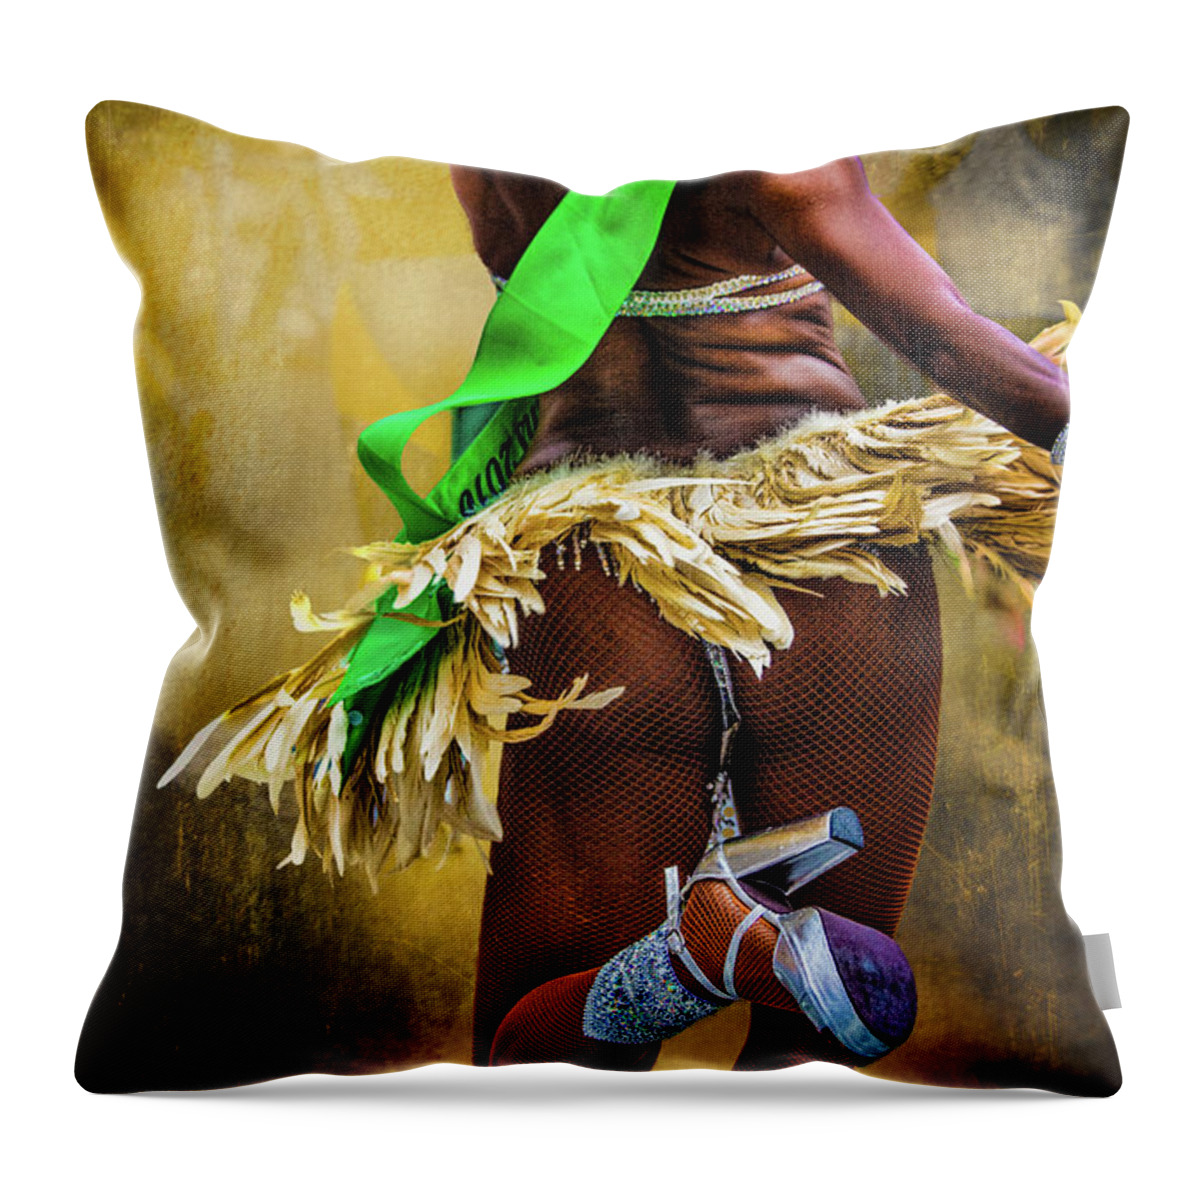 Dancer Throw Pillow featuring the photograph The Samba Dancer by Chris Lord